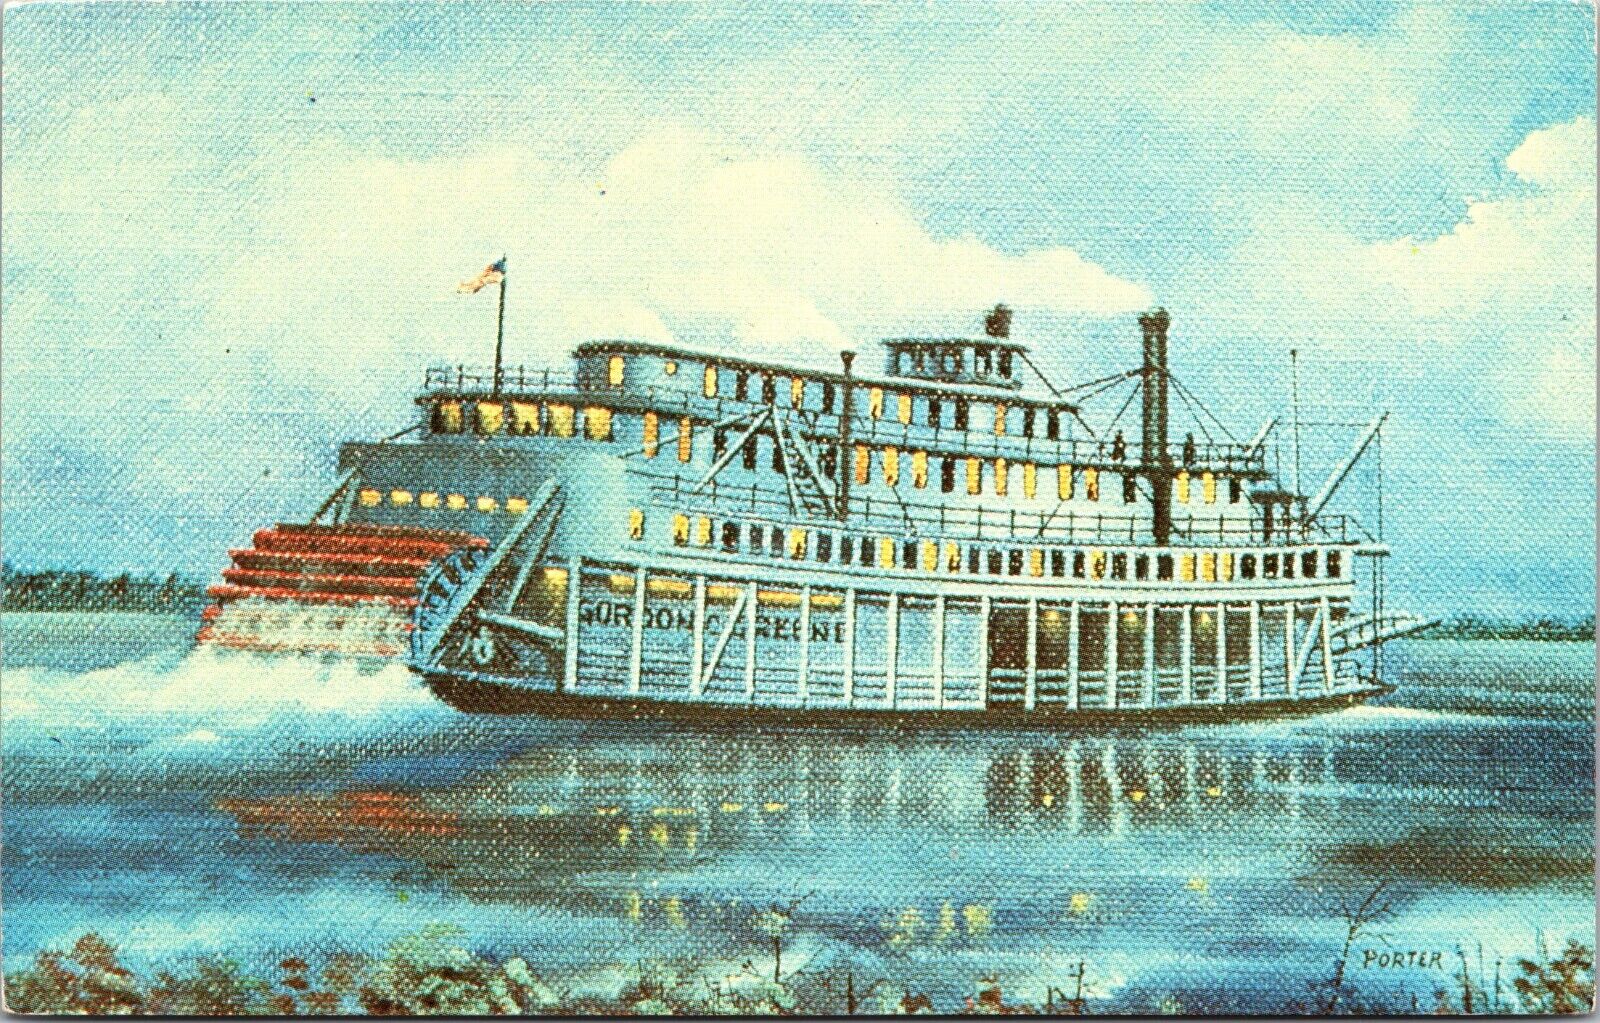 Painting Gordon C Green Mississippi River Boat painting by Russ Porter postcard